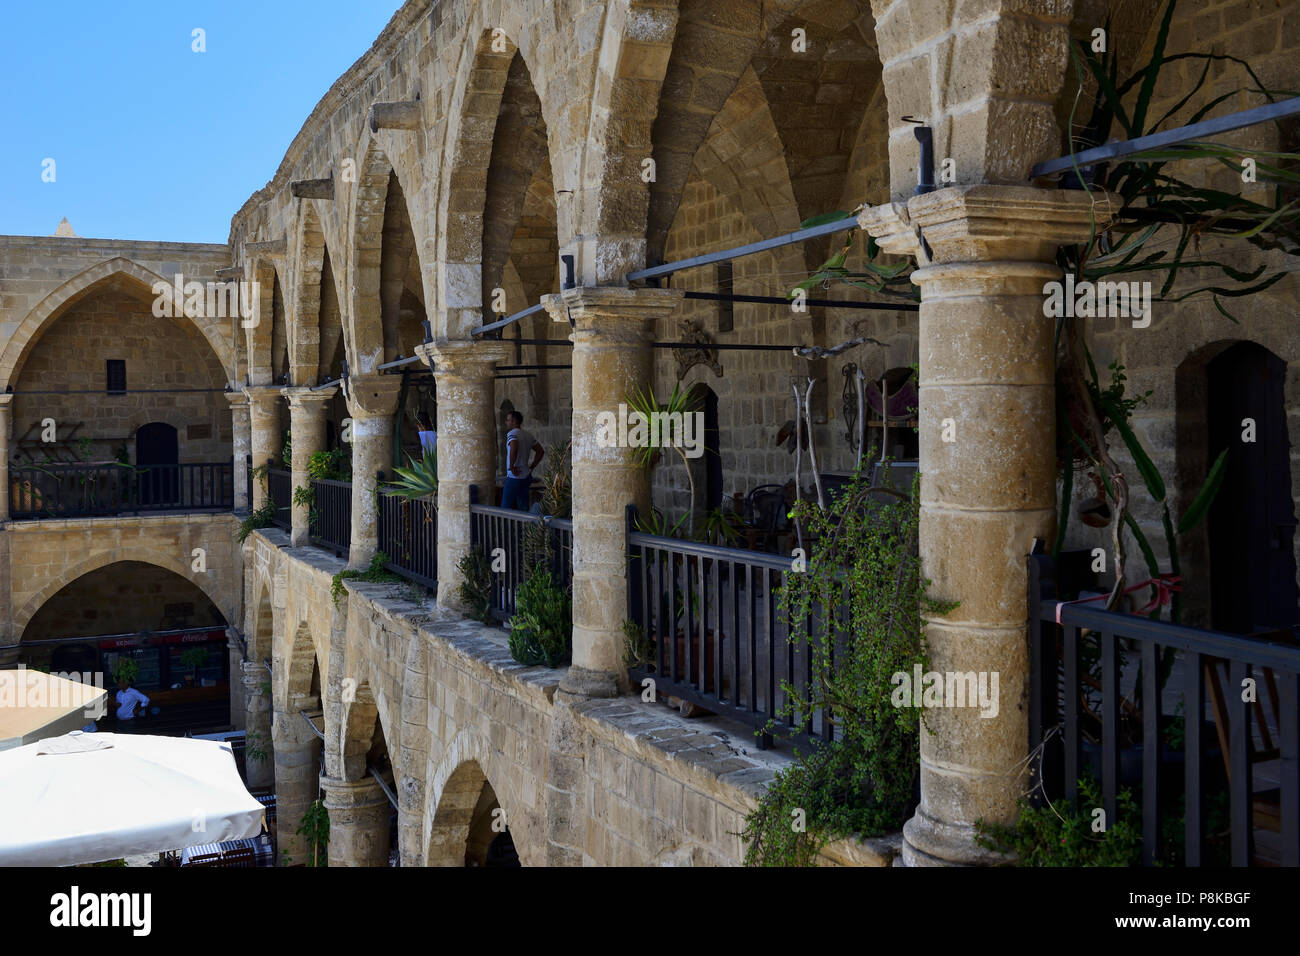 The vaulted galleries of Buyuk Han, a former caravanserai, in North Nicosia (Lefkosa), Turkish Republic of Northern Cyprus Stock Photo